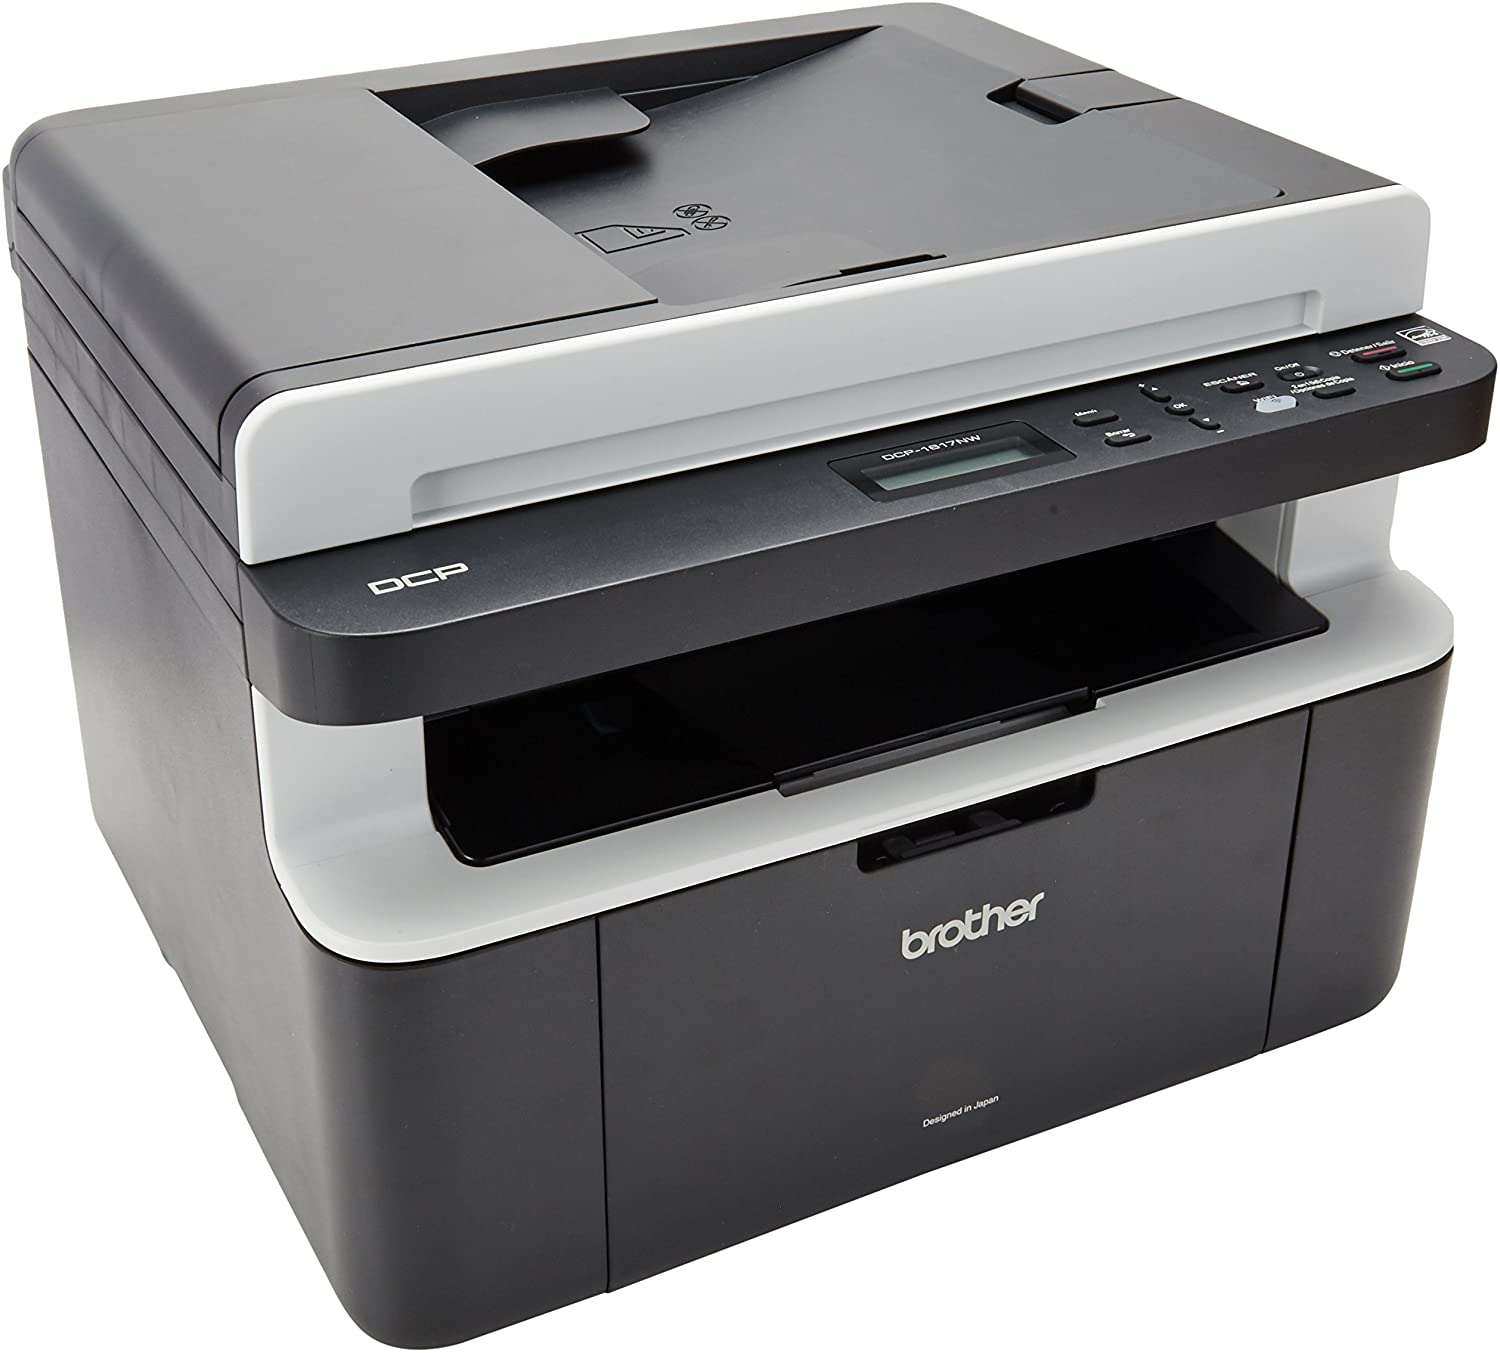 Brother dcp 10. Brother DCP-7500. Brother DCP-1602r. Brother DCP-8070d. Brother DCP 8085 DN.